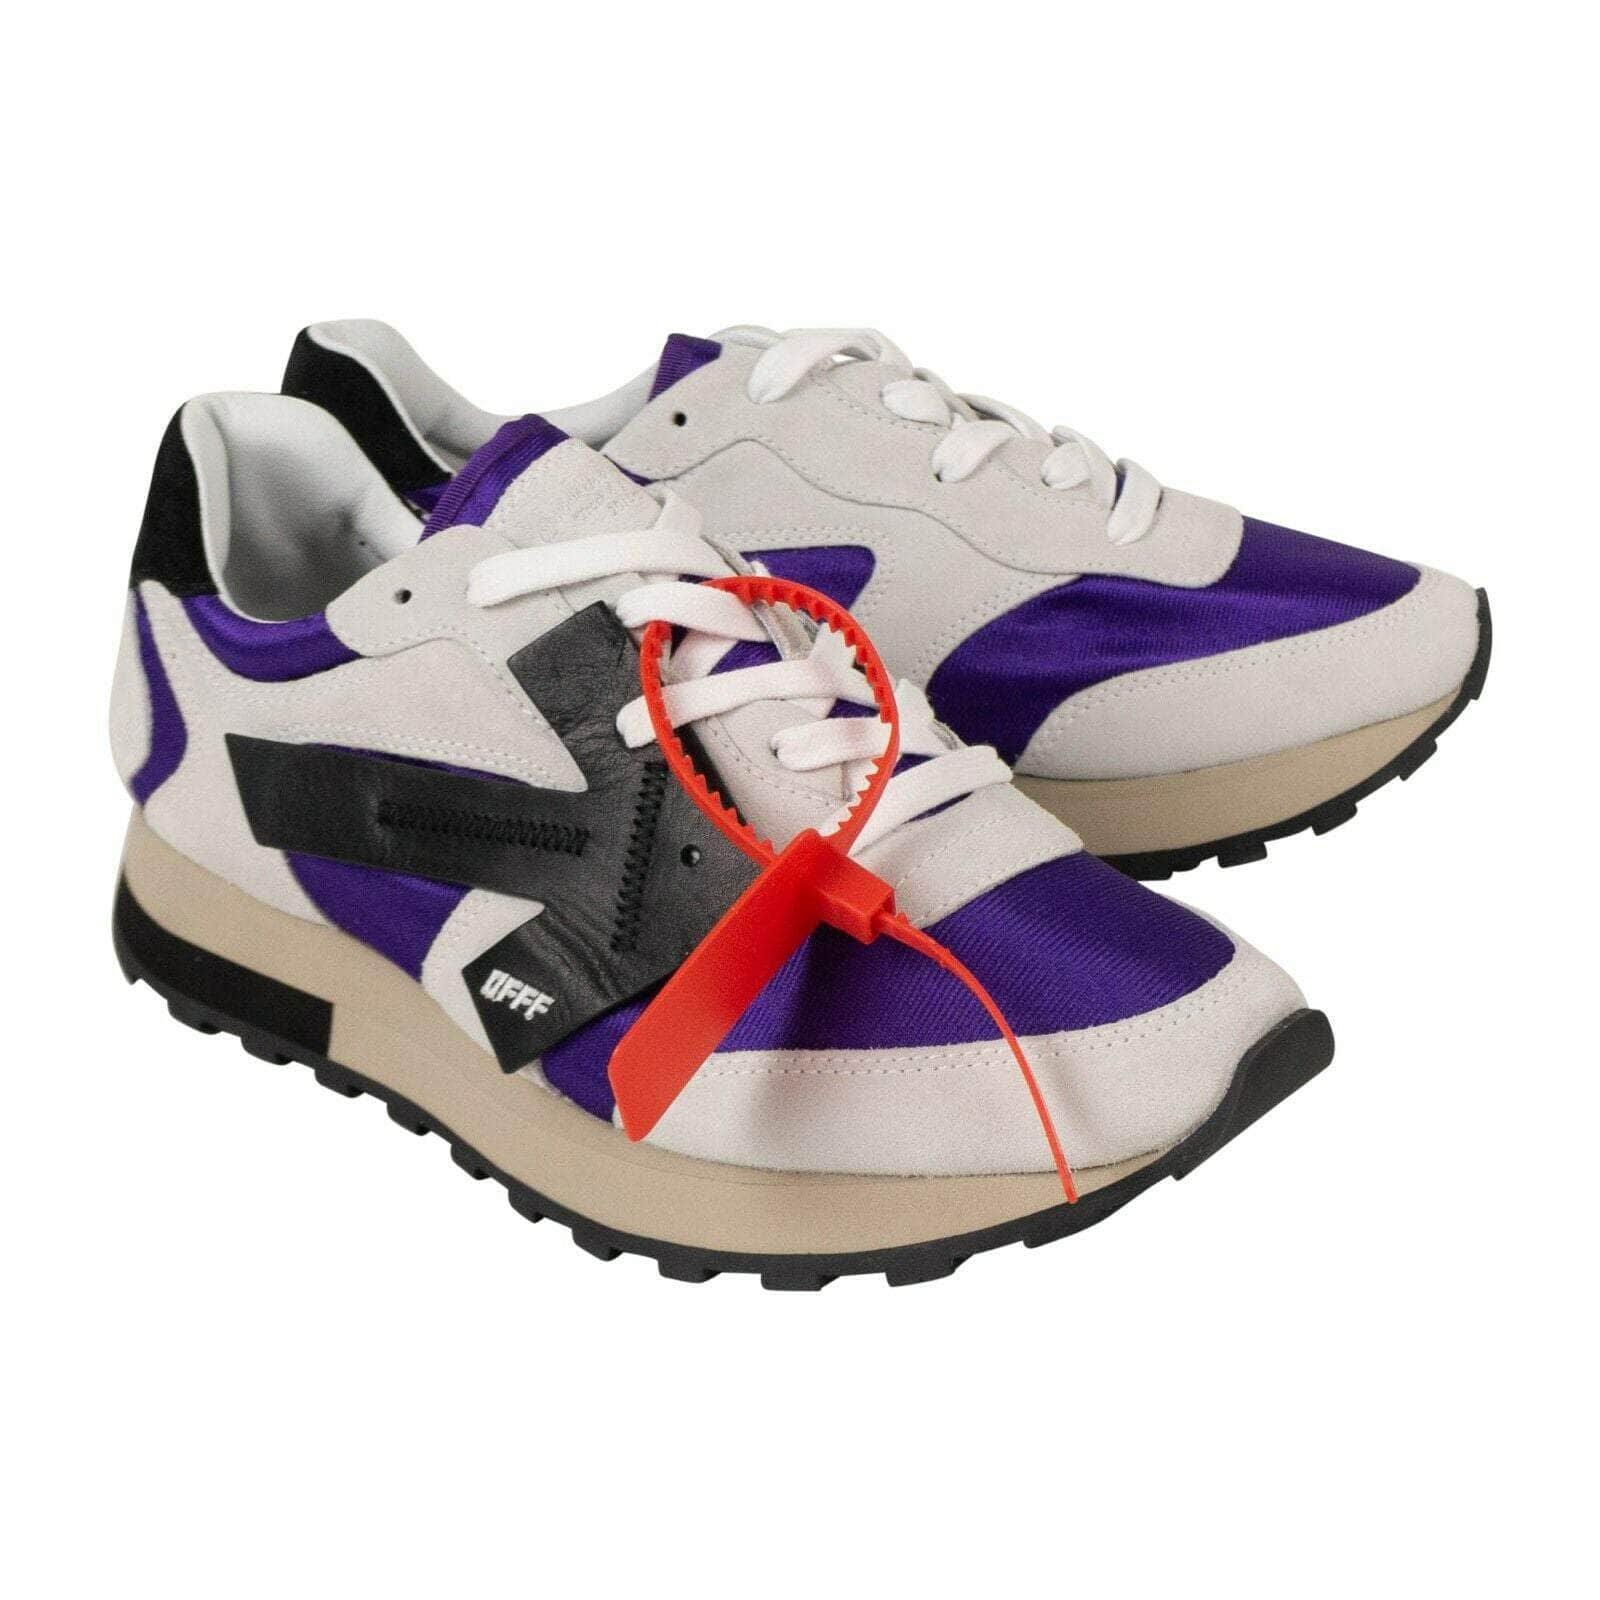 Off-White c/o Virgil Abloh 250-500, couponcollection, gender-womens, main-shoes, off white, off-white-c-o-virgil-abloh, size-42-eu HG 'Purple Runner' Sneakers - White